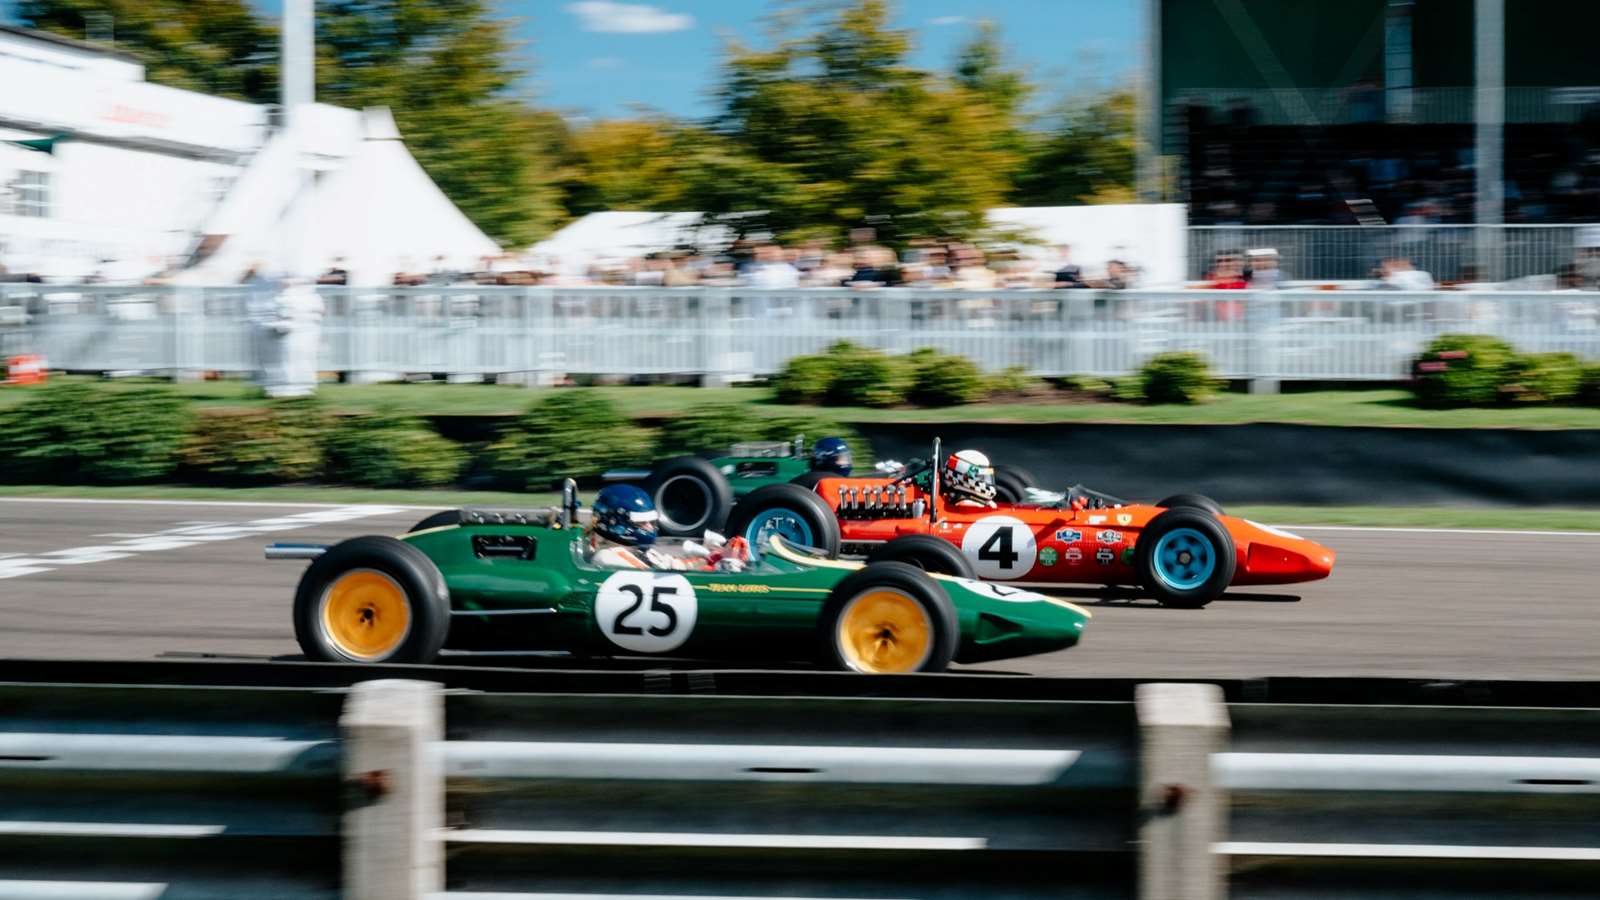 Lotus 25 coming to FOS 2023